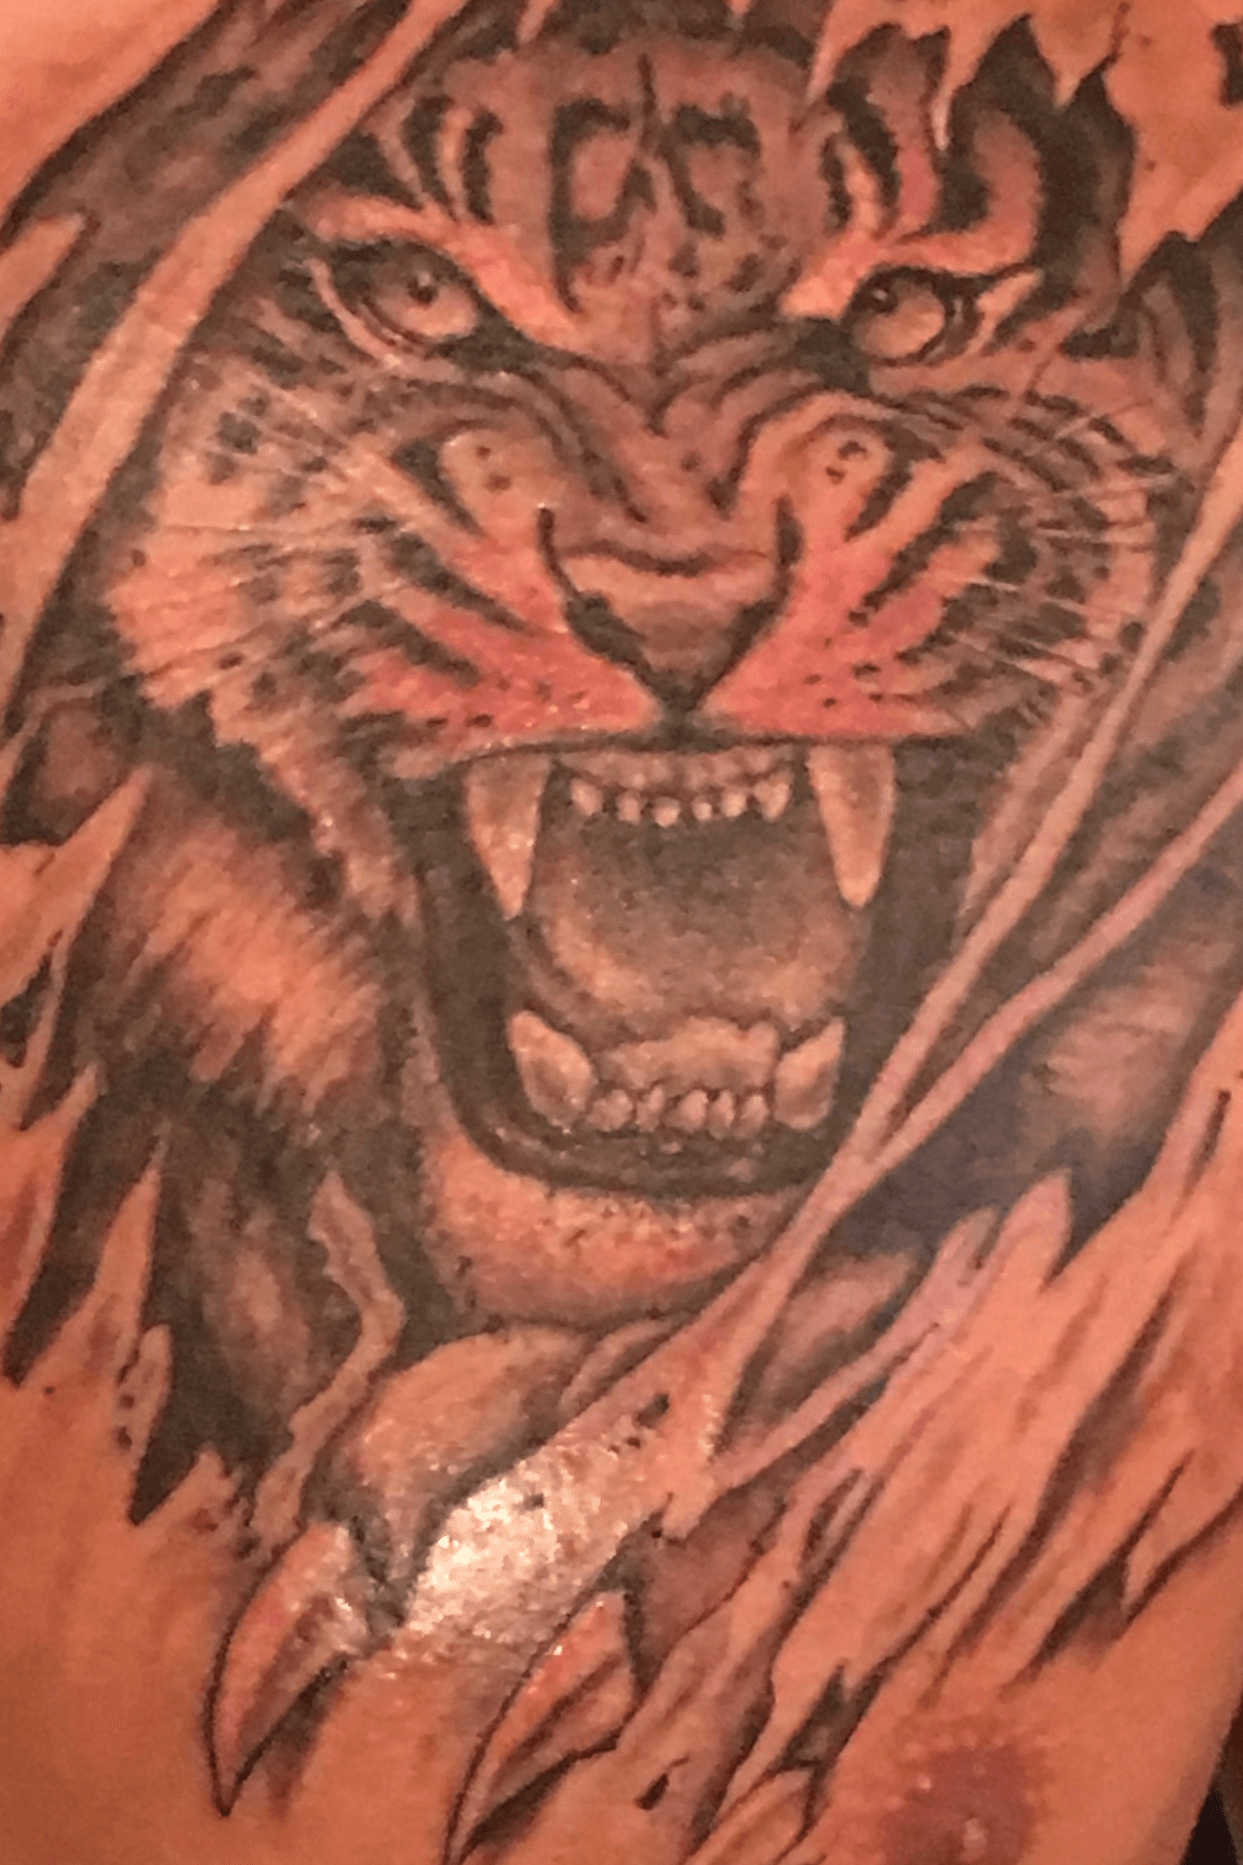 Tattoo uploaded by Chris Nguyen • Tiger Ripping Through My Chest • Tattoodo